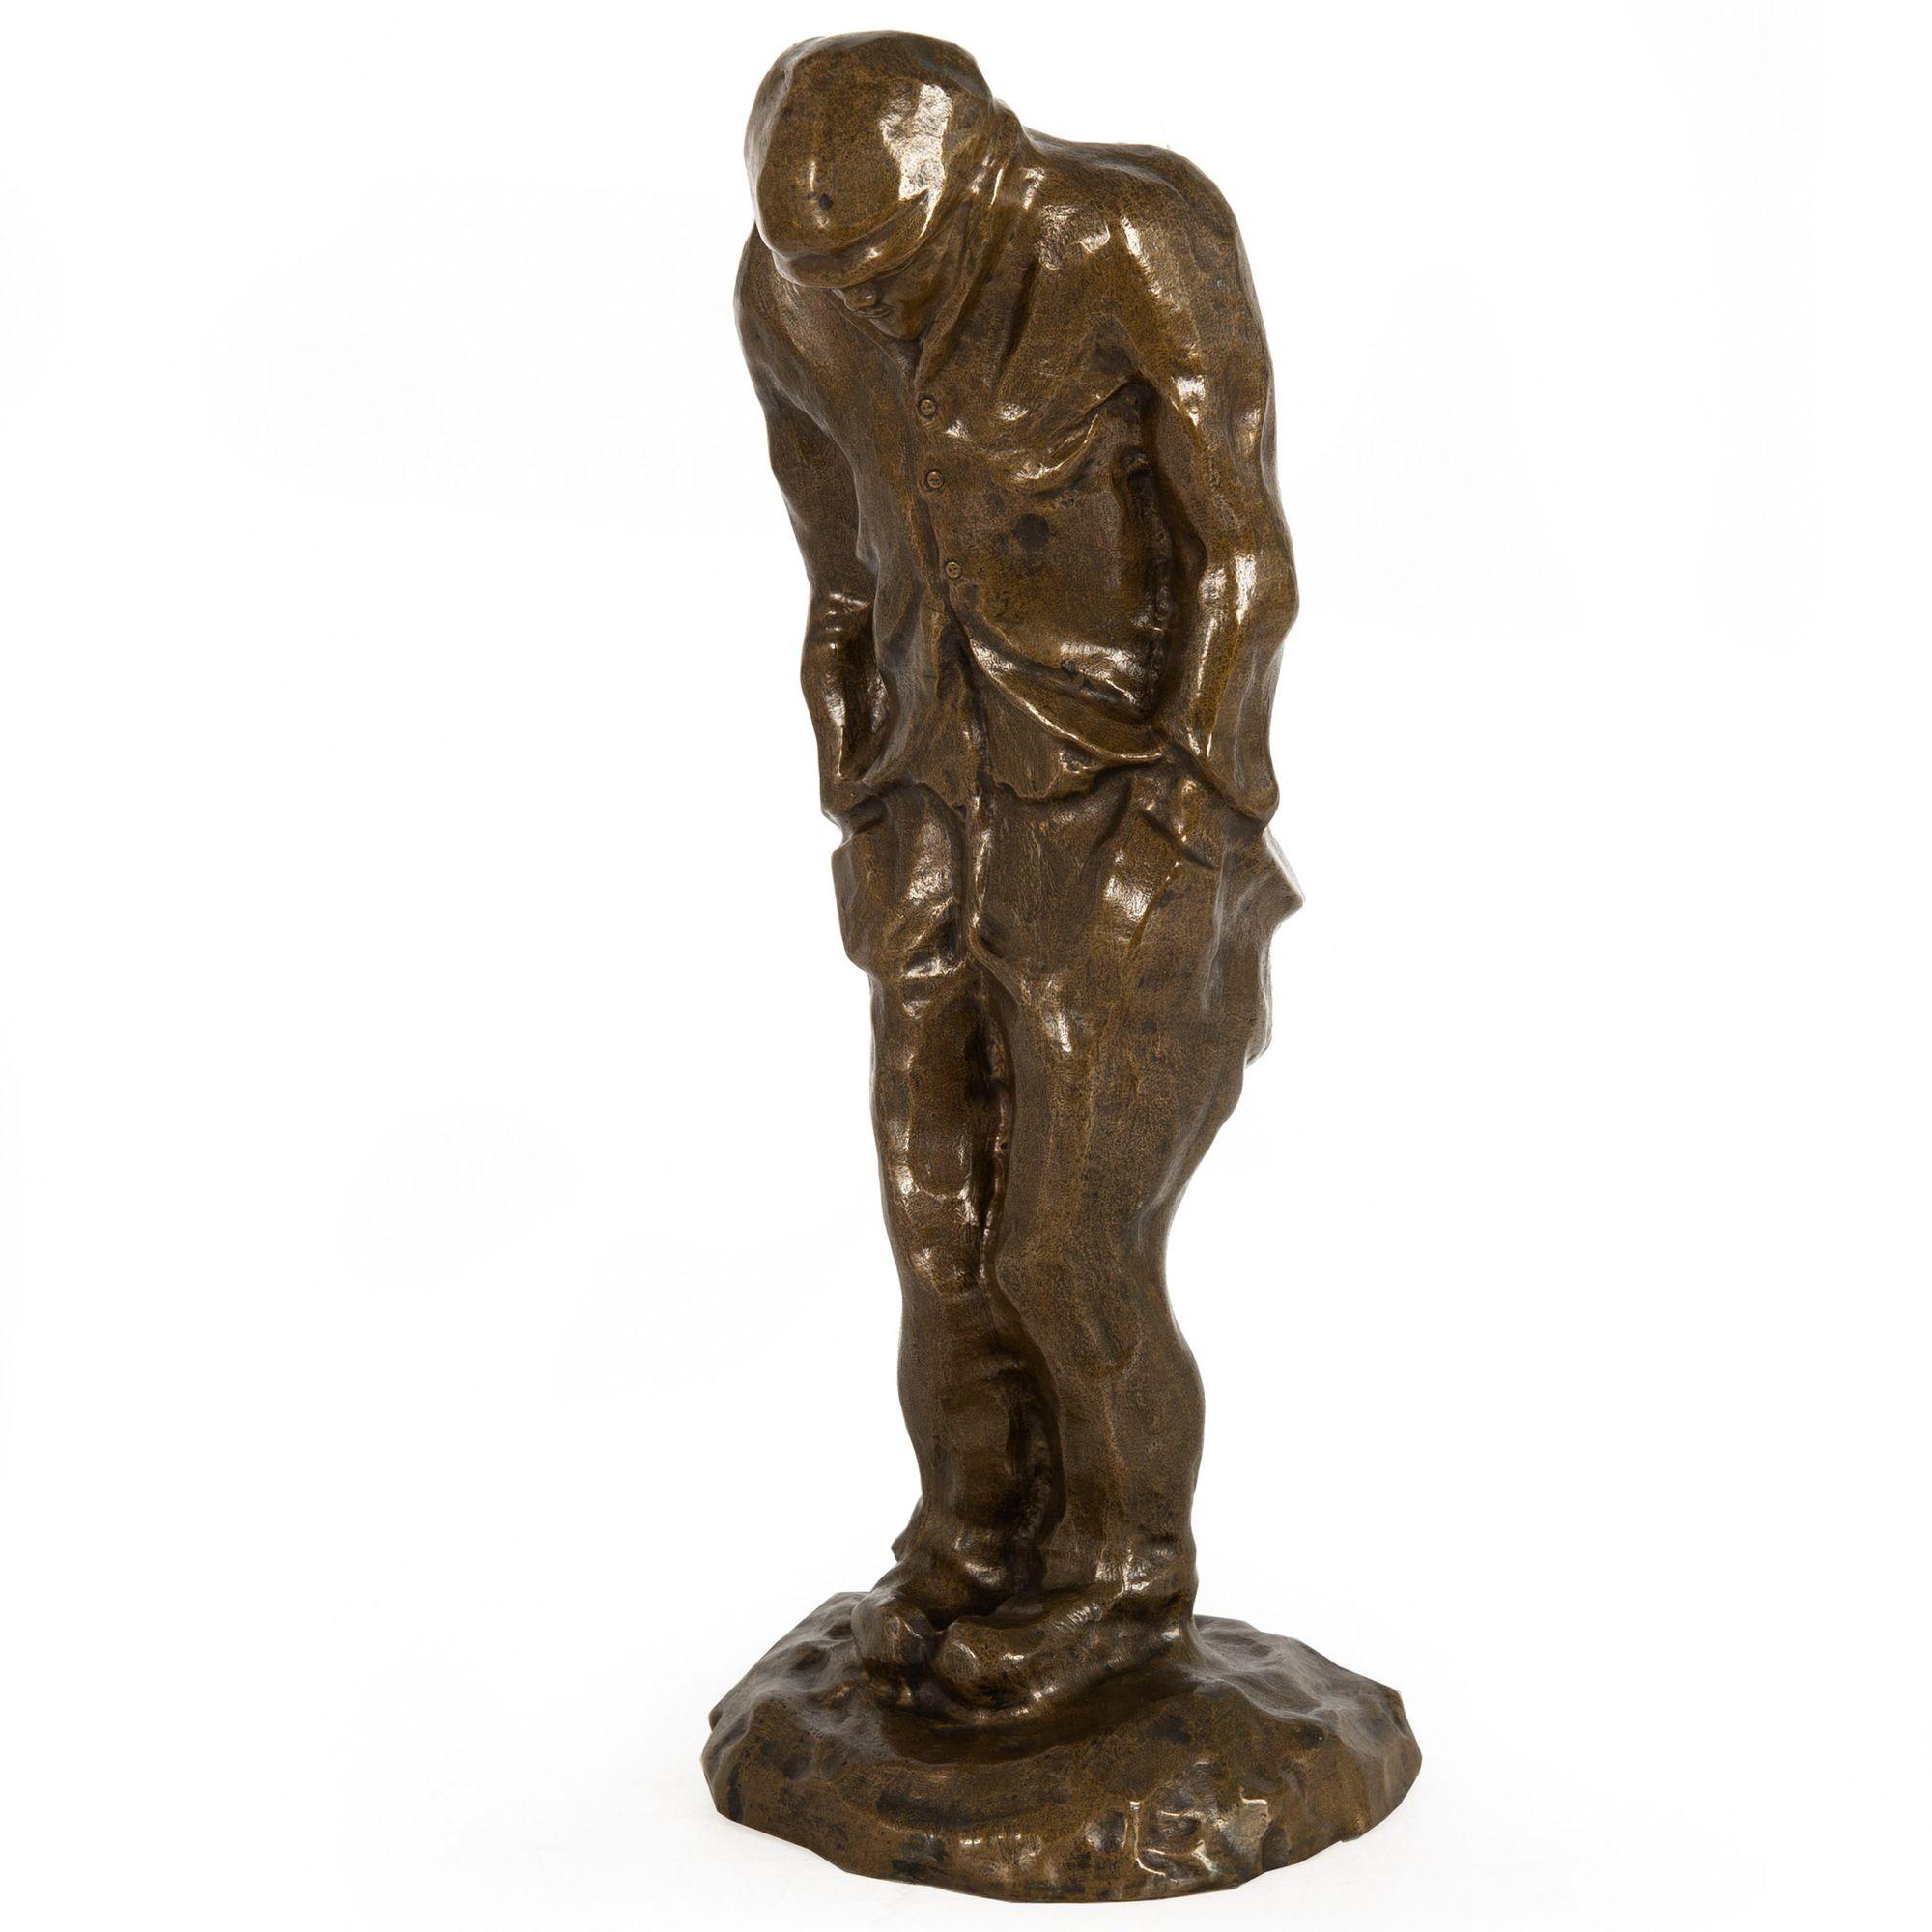 French Bronze Sculpture “Shivering Worker” in manner of Constantin Meunier For Sale 14